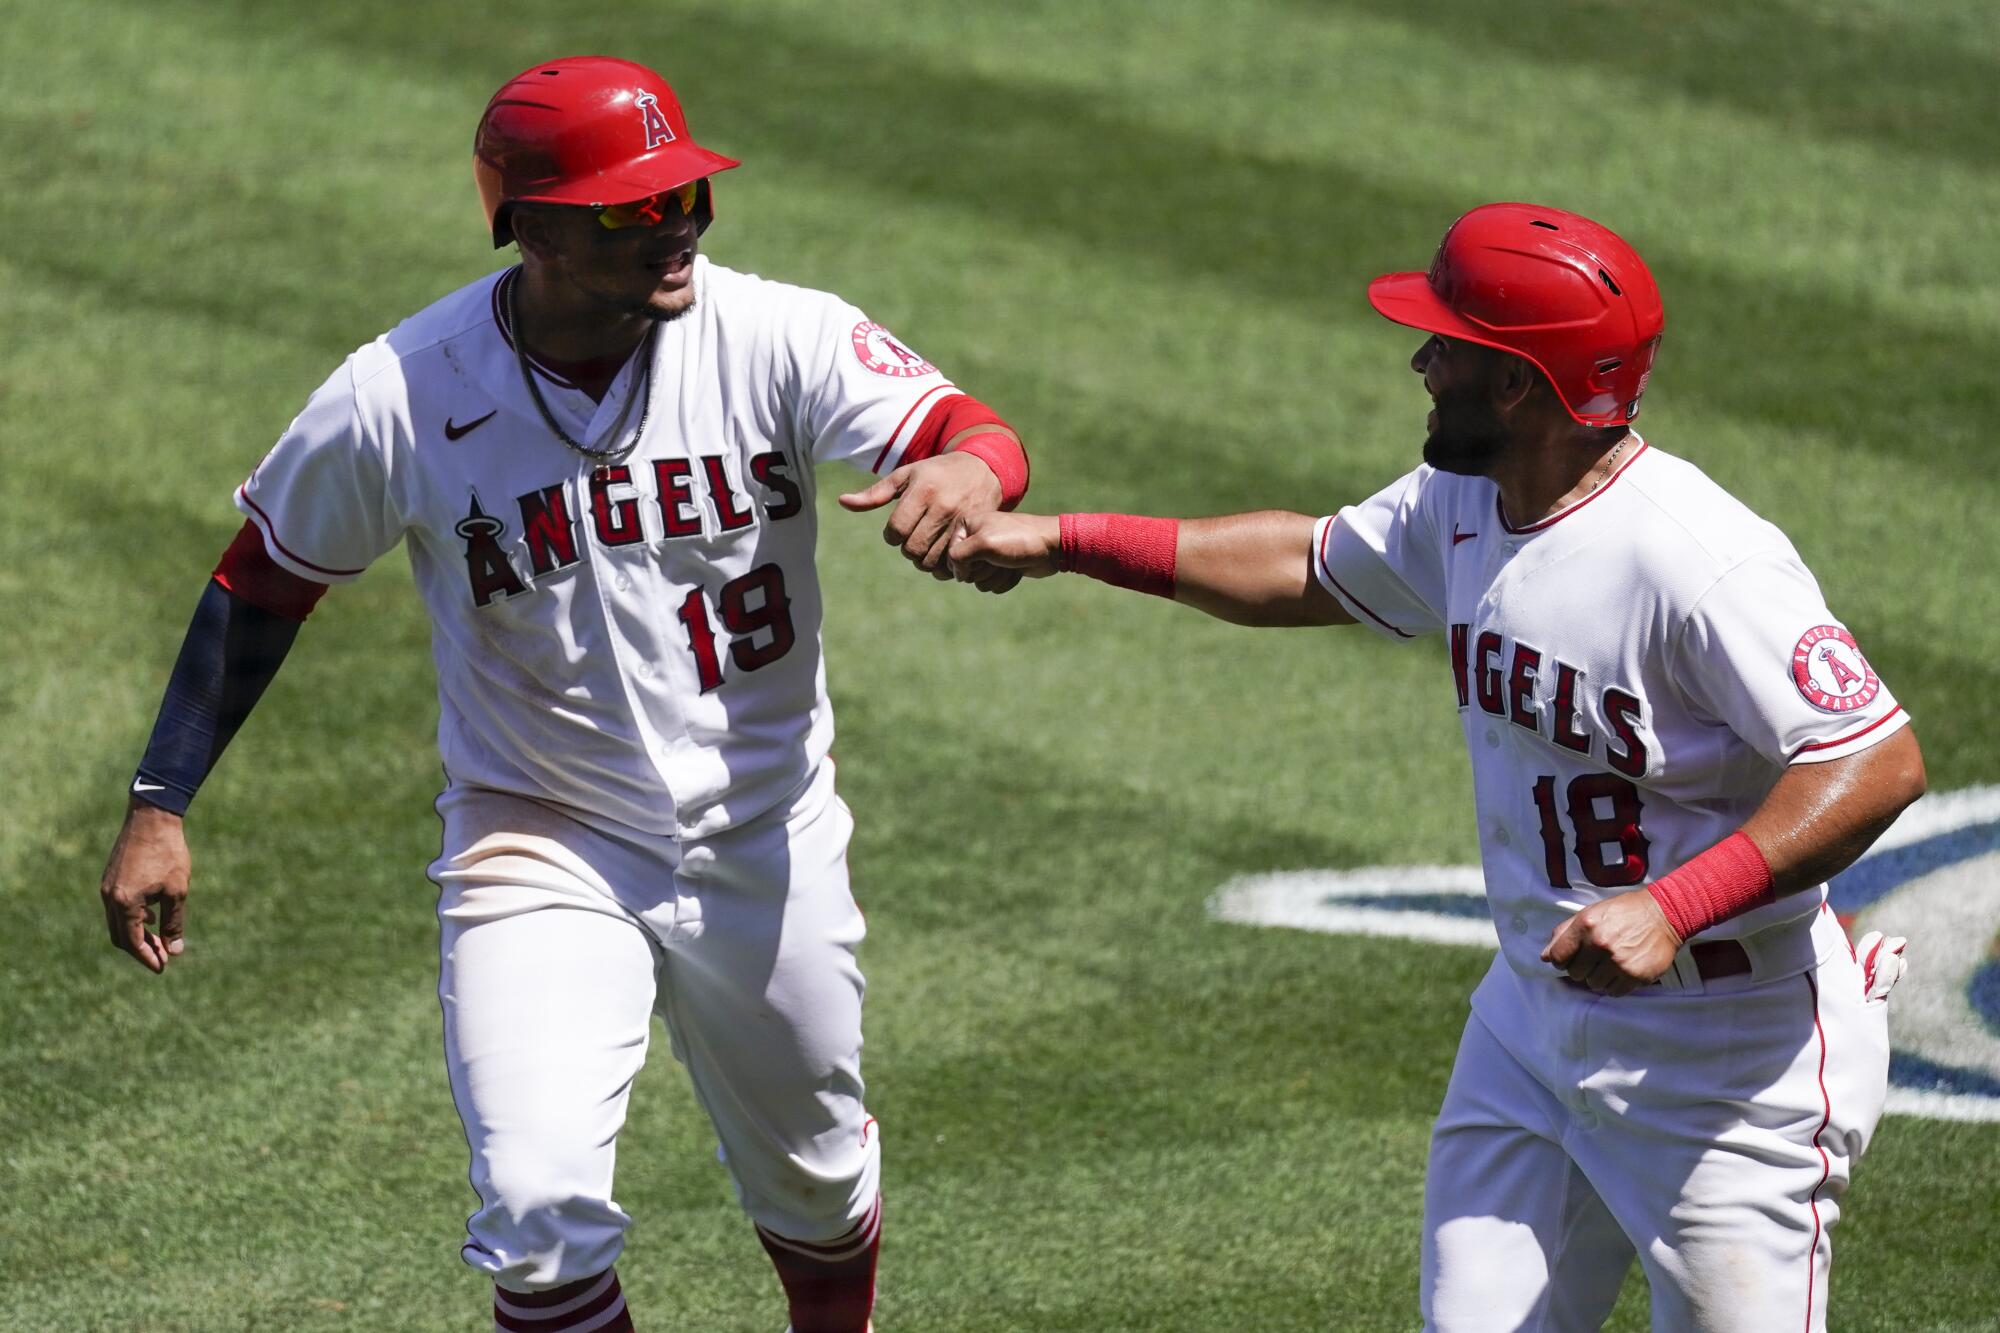 Angels' Juan Lagares and Jose Rojas celebrate after they both scored off of a single hit by Taylor Ward.